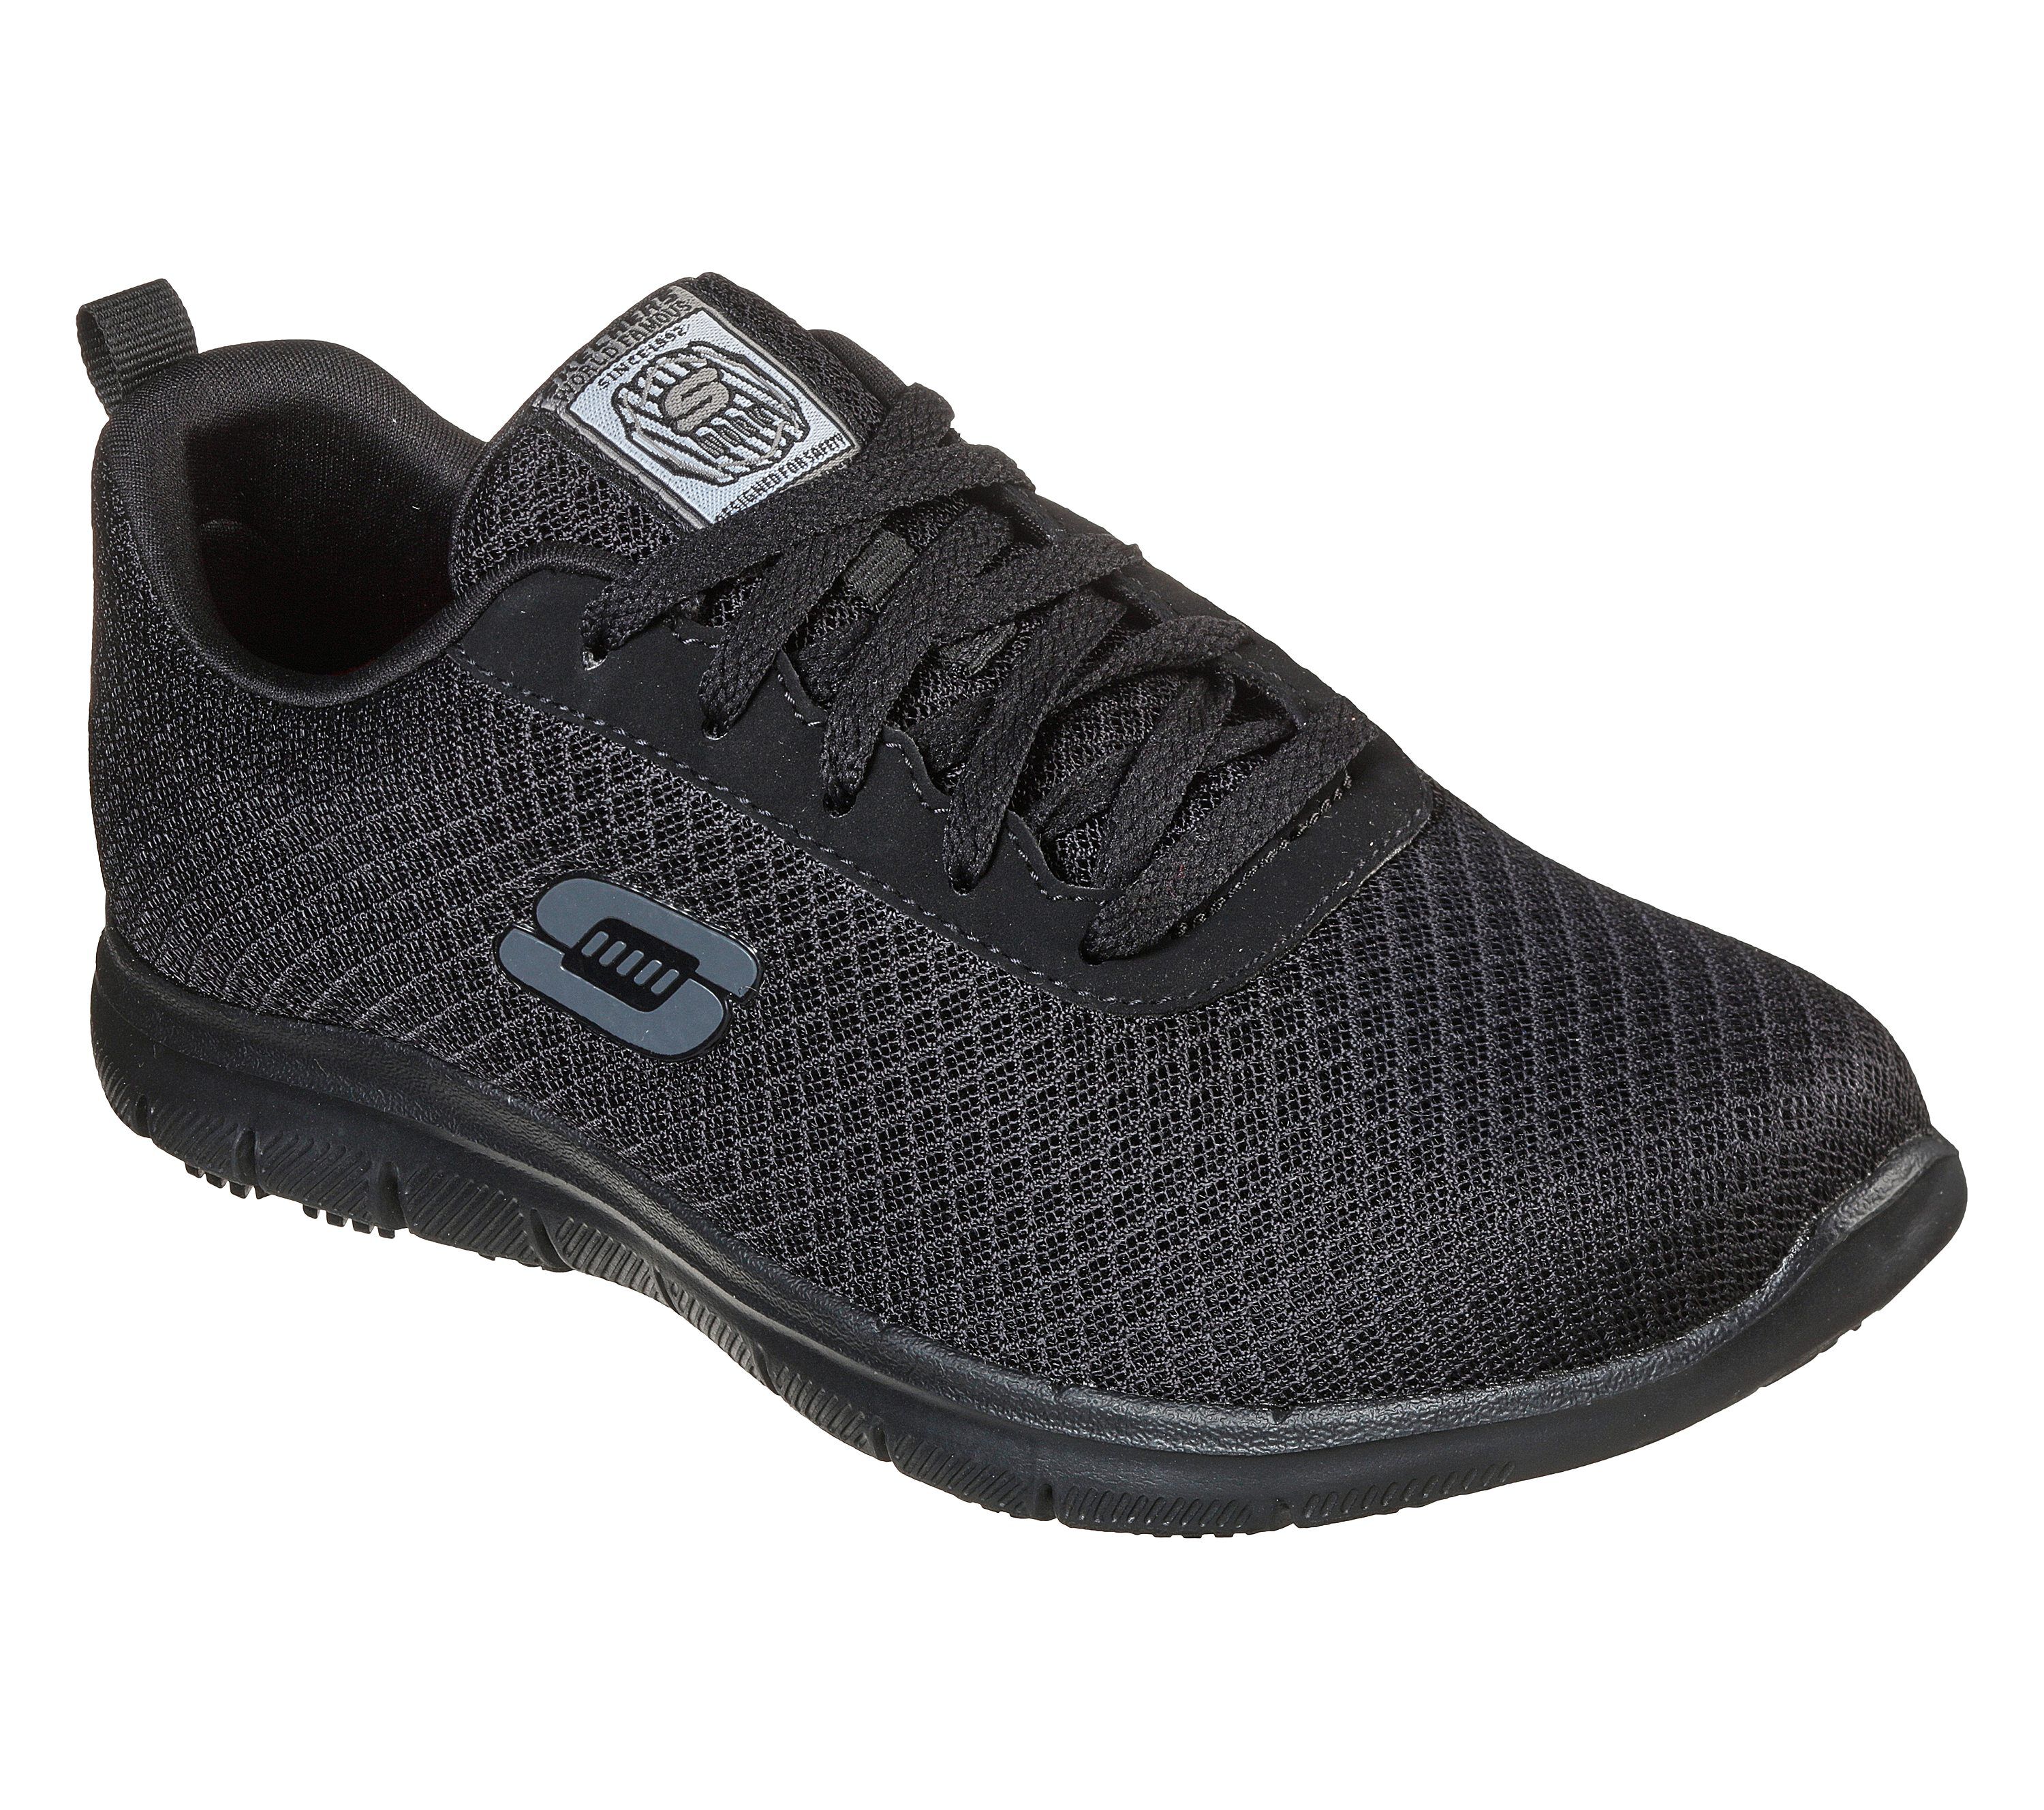 Work Shoes \u0026 Safety Shoes | SKECHERS